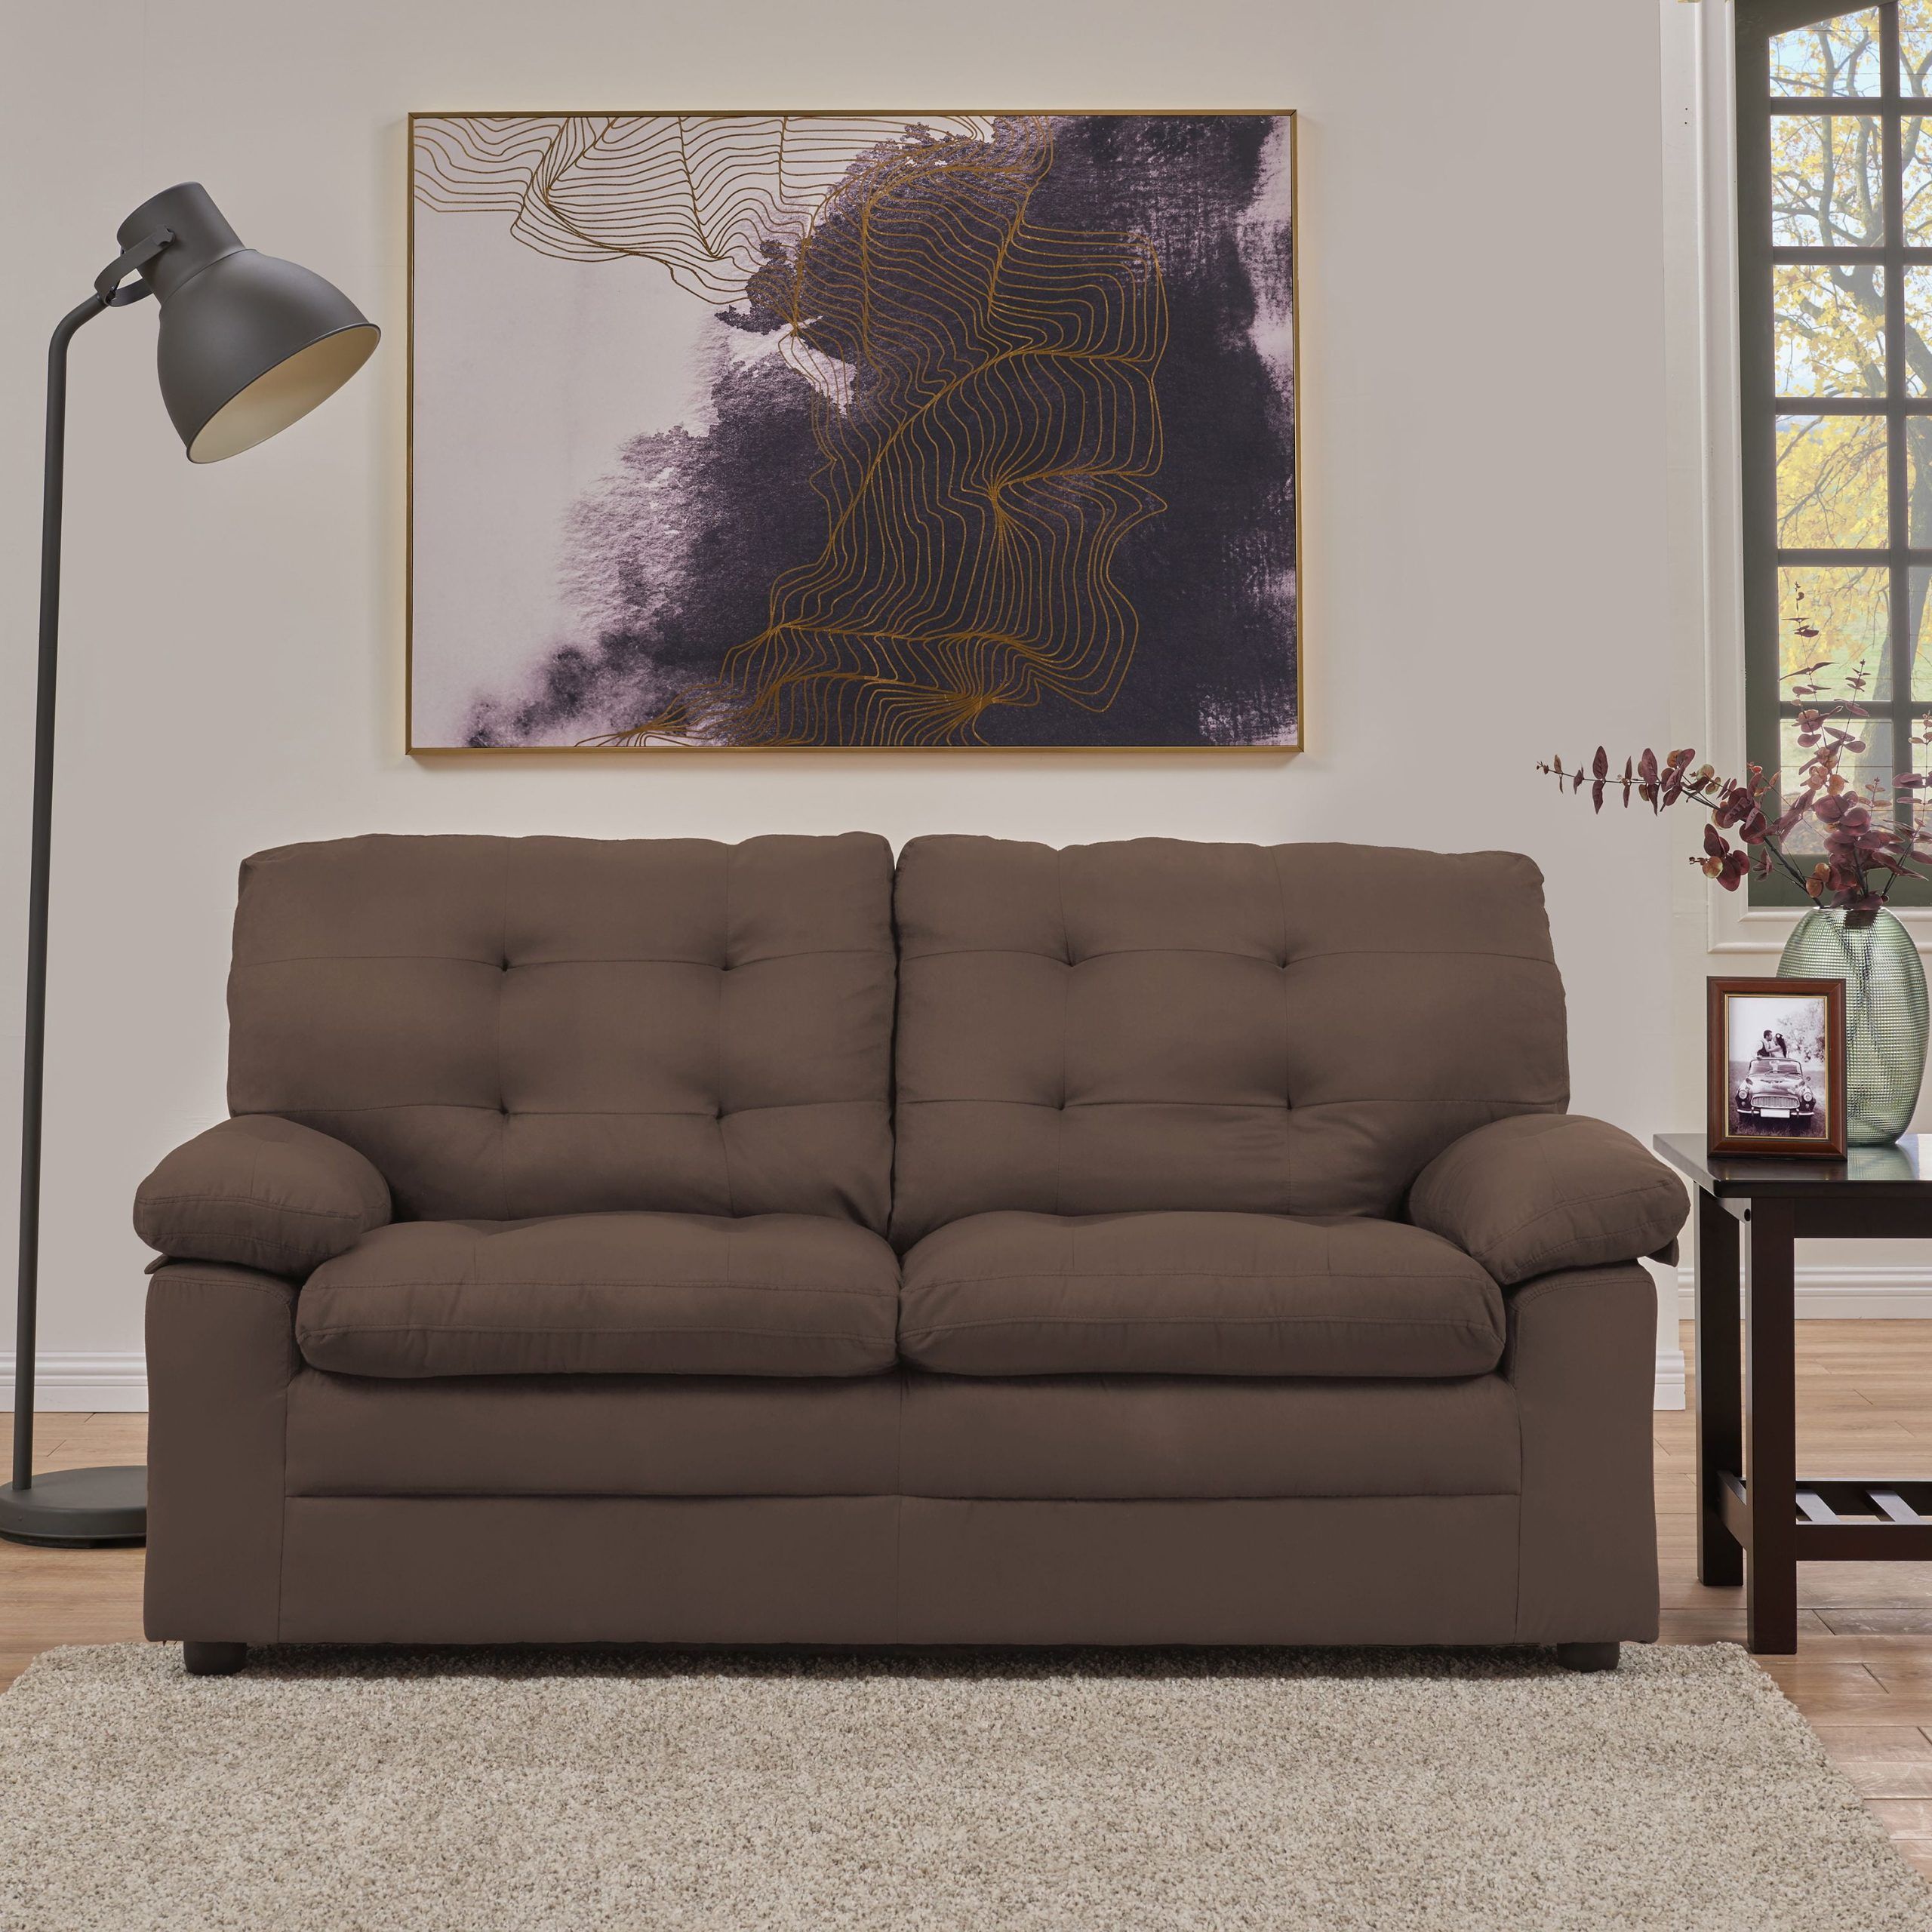 Mainstays Buchannan Upholstered Apartment Sofa, Multiple Colors –  Walmart Intended For Sofas In Multiple Colors (View 14 of 15)